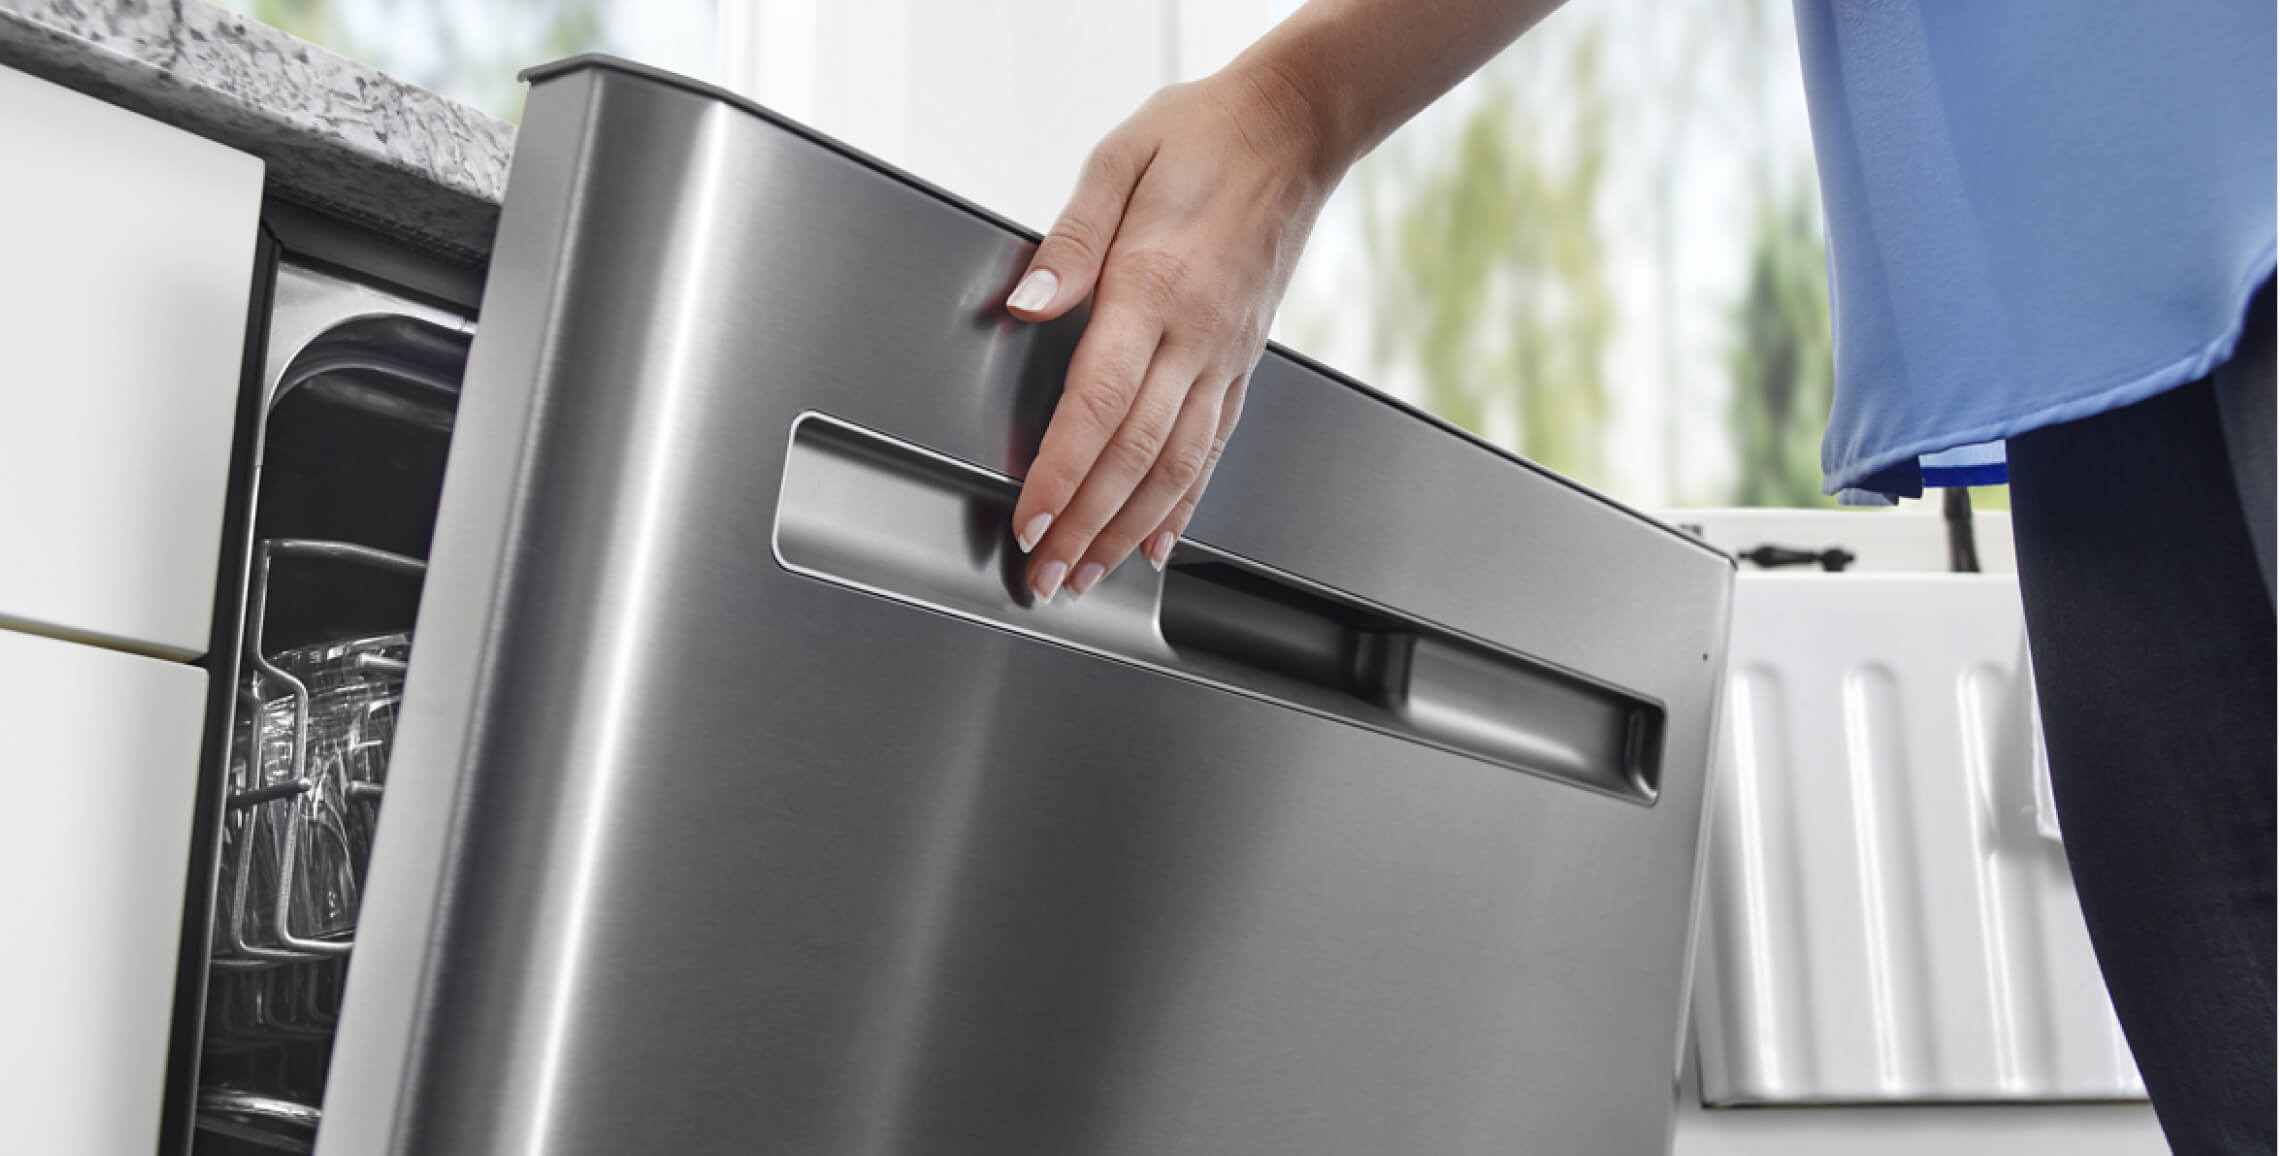 How to Remove Fingerprints on Stainless Steel Appliances